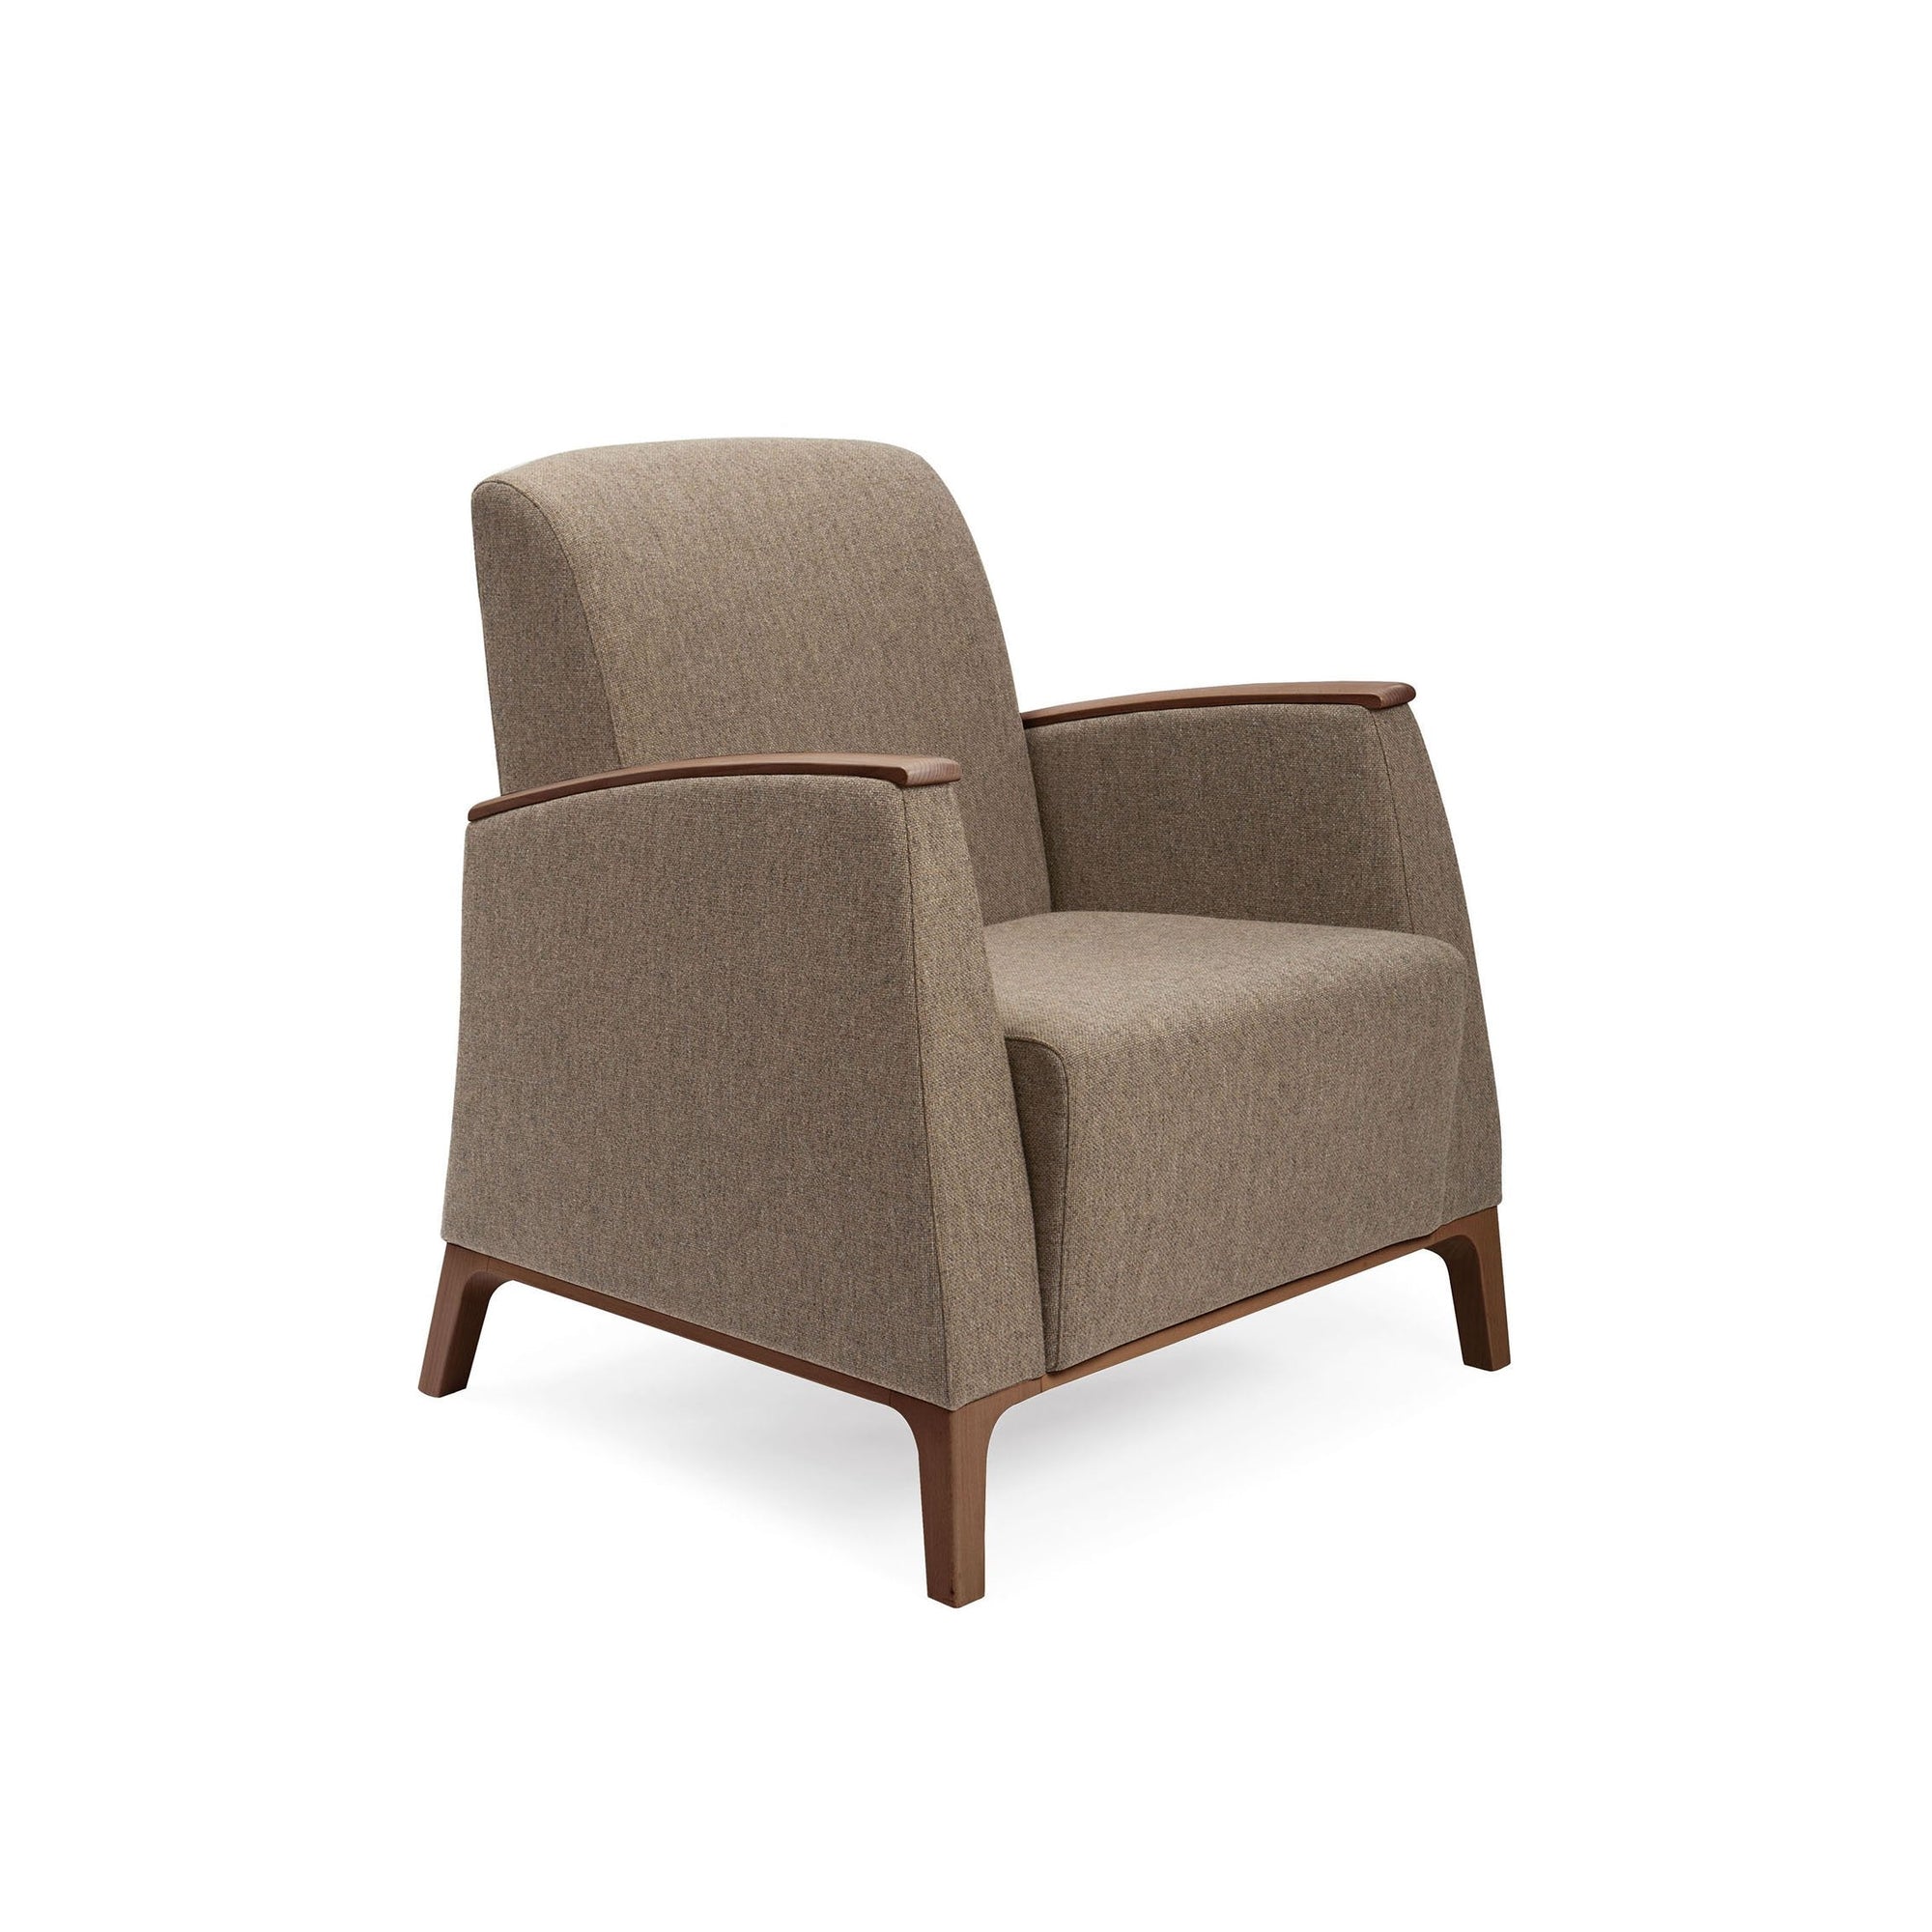 Mamy 57-64/1 Lounge Chair-Piaval-Contract Furniture Store